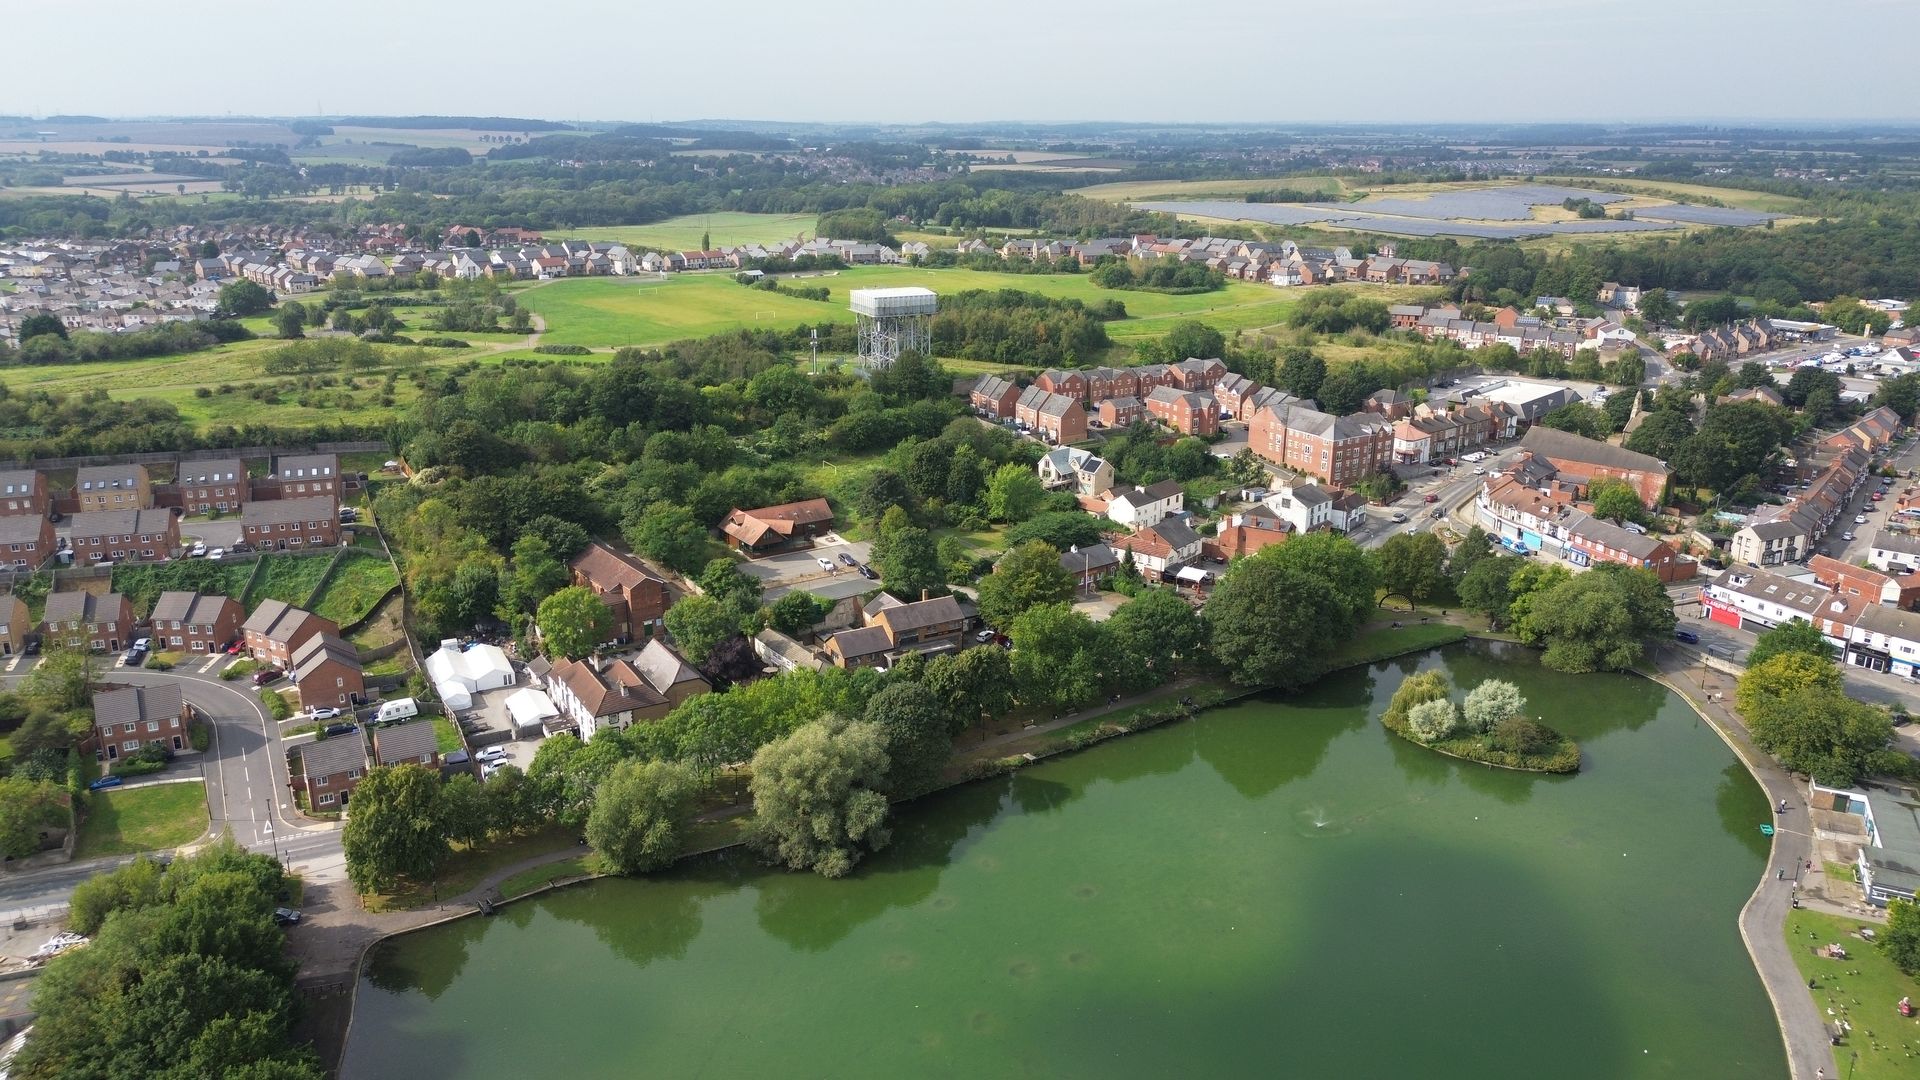 A drone image over Askern in Doncaster featuring houses and the historic Askern lake